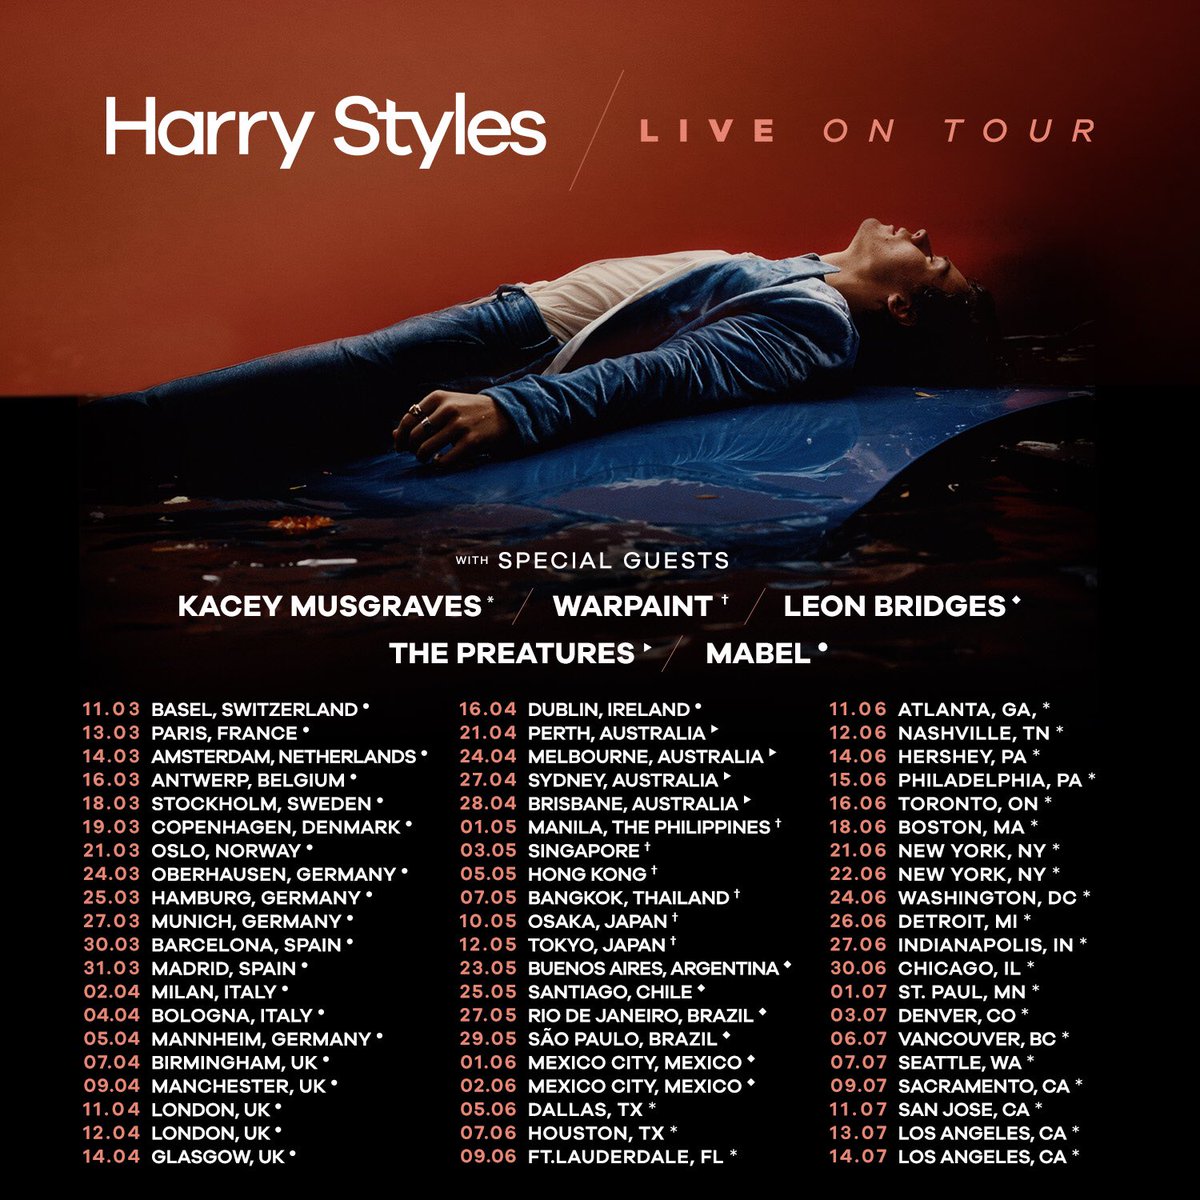 live in tour harry styles